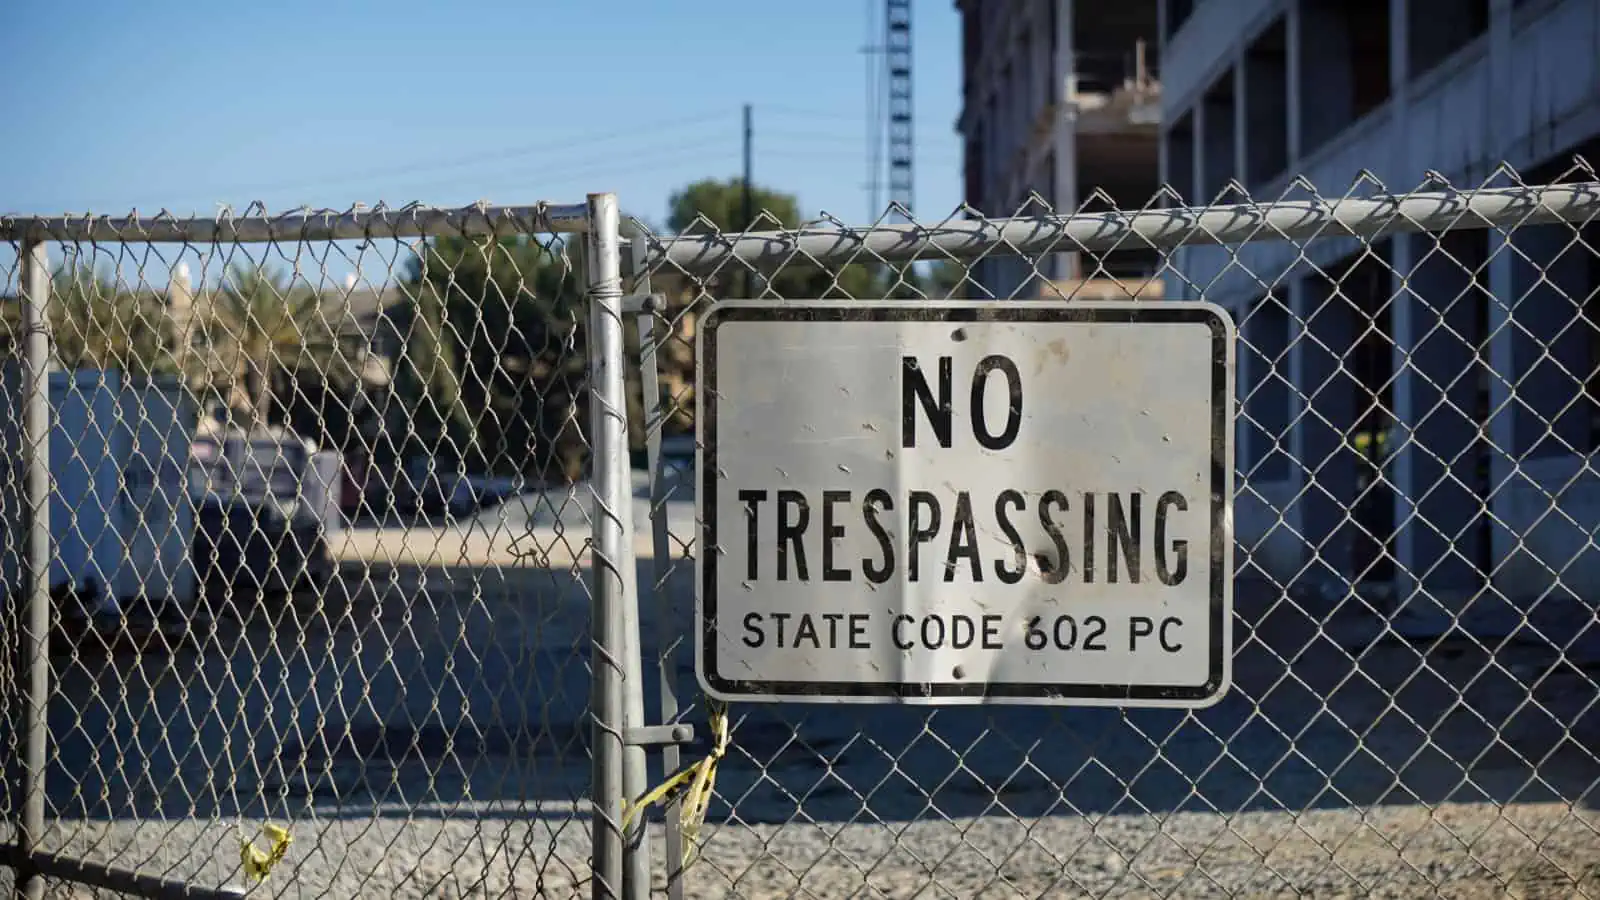 No trespassing sign on fence